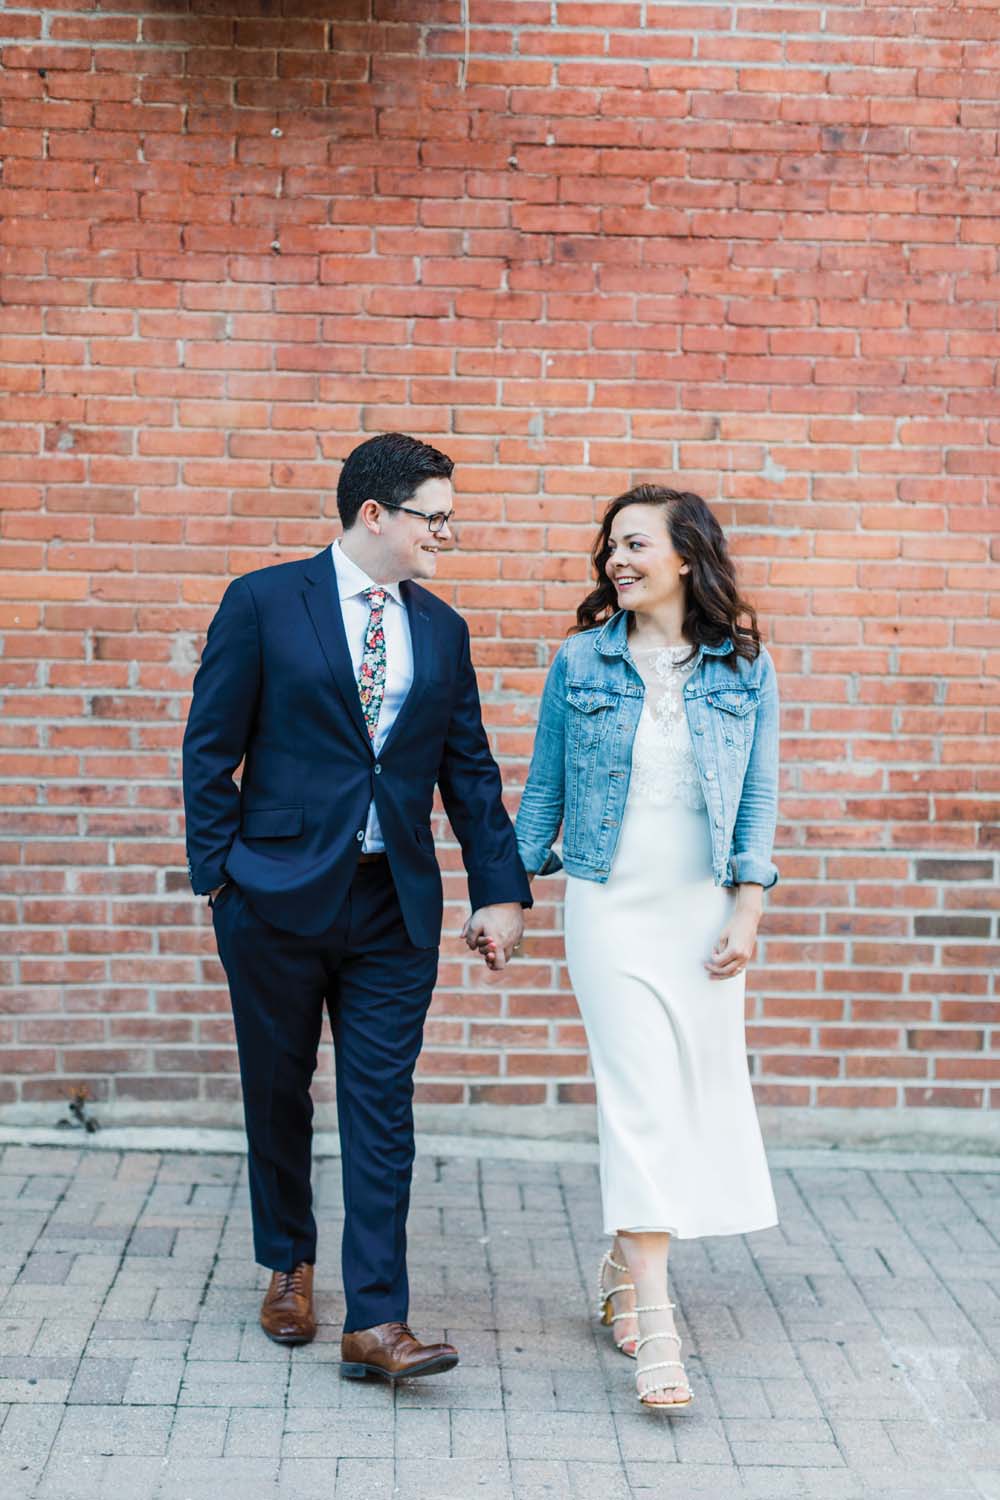 A Fun, Summer Themed Wedding with a Touch of Spanish Flare in Toronto